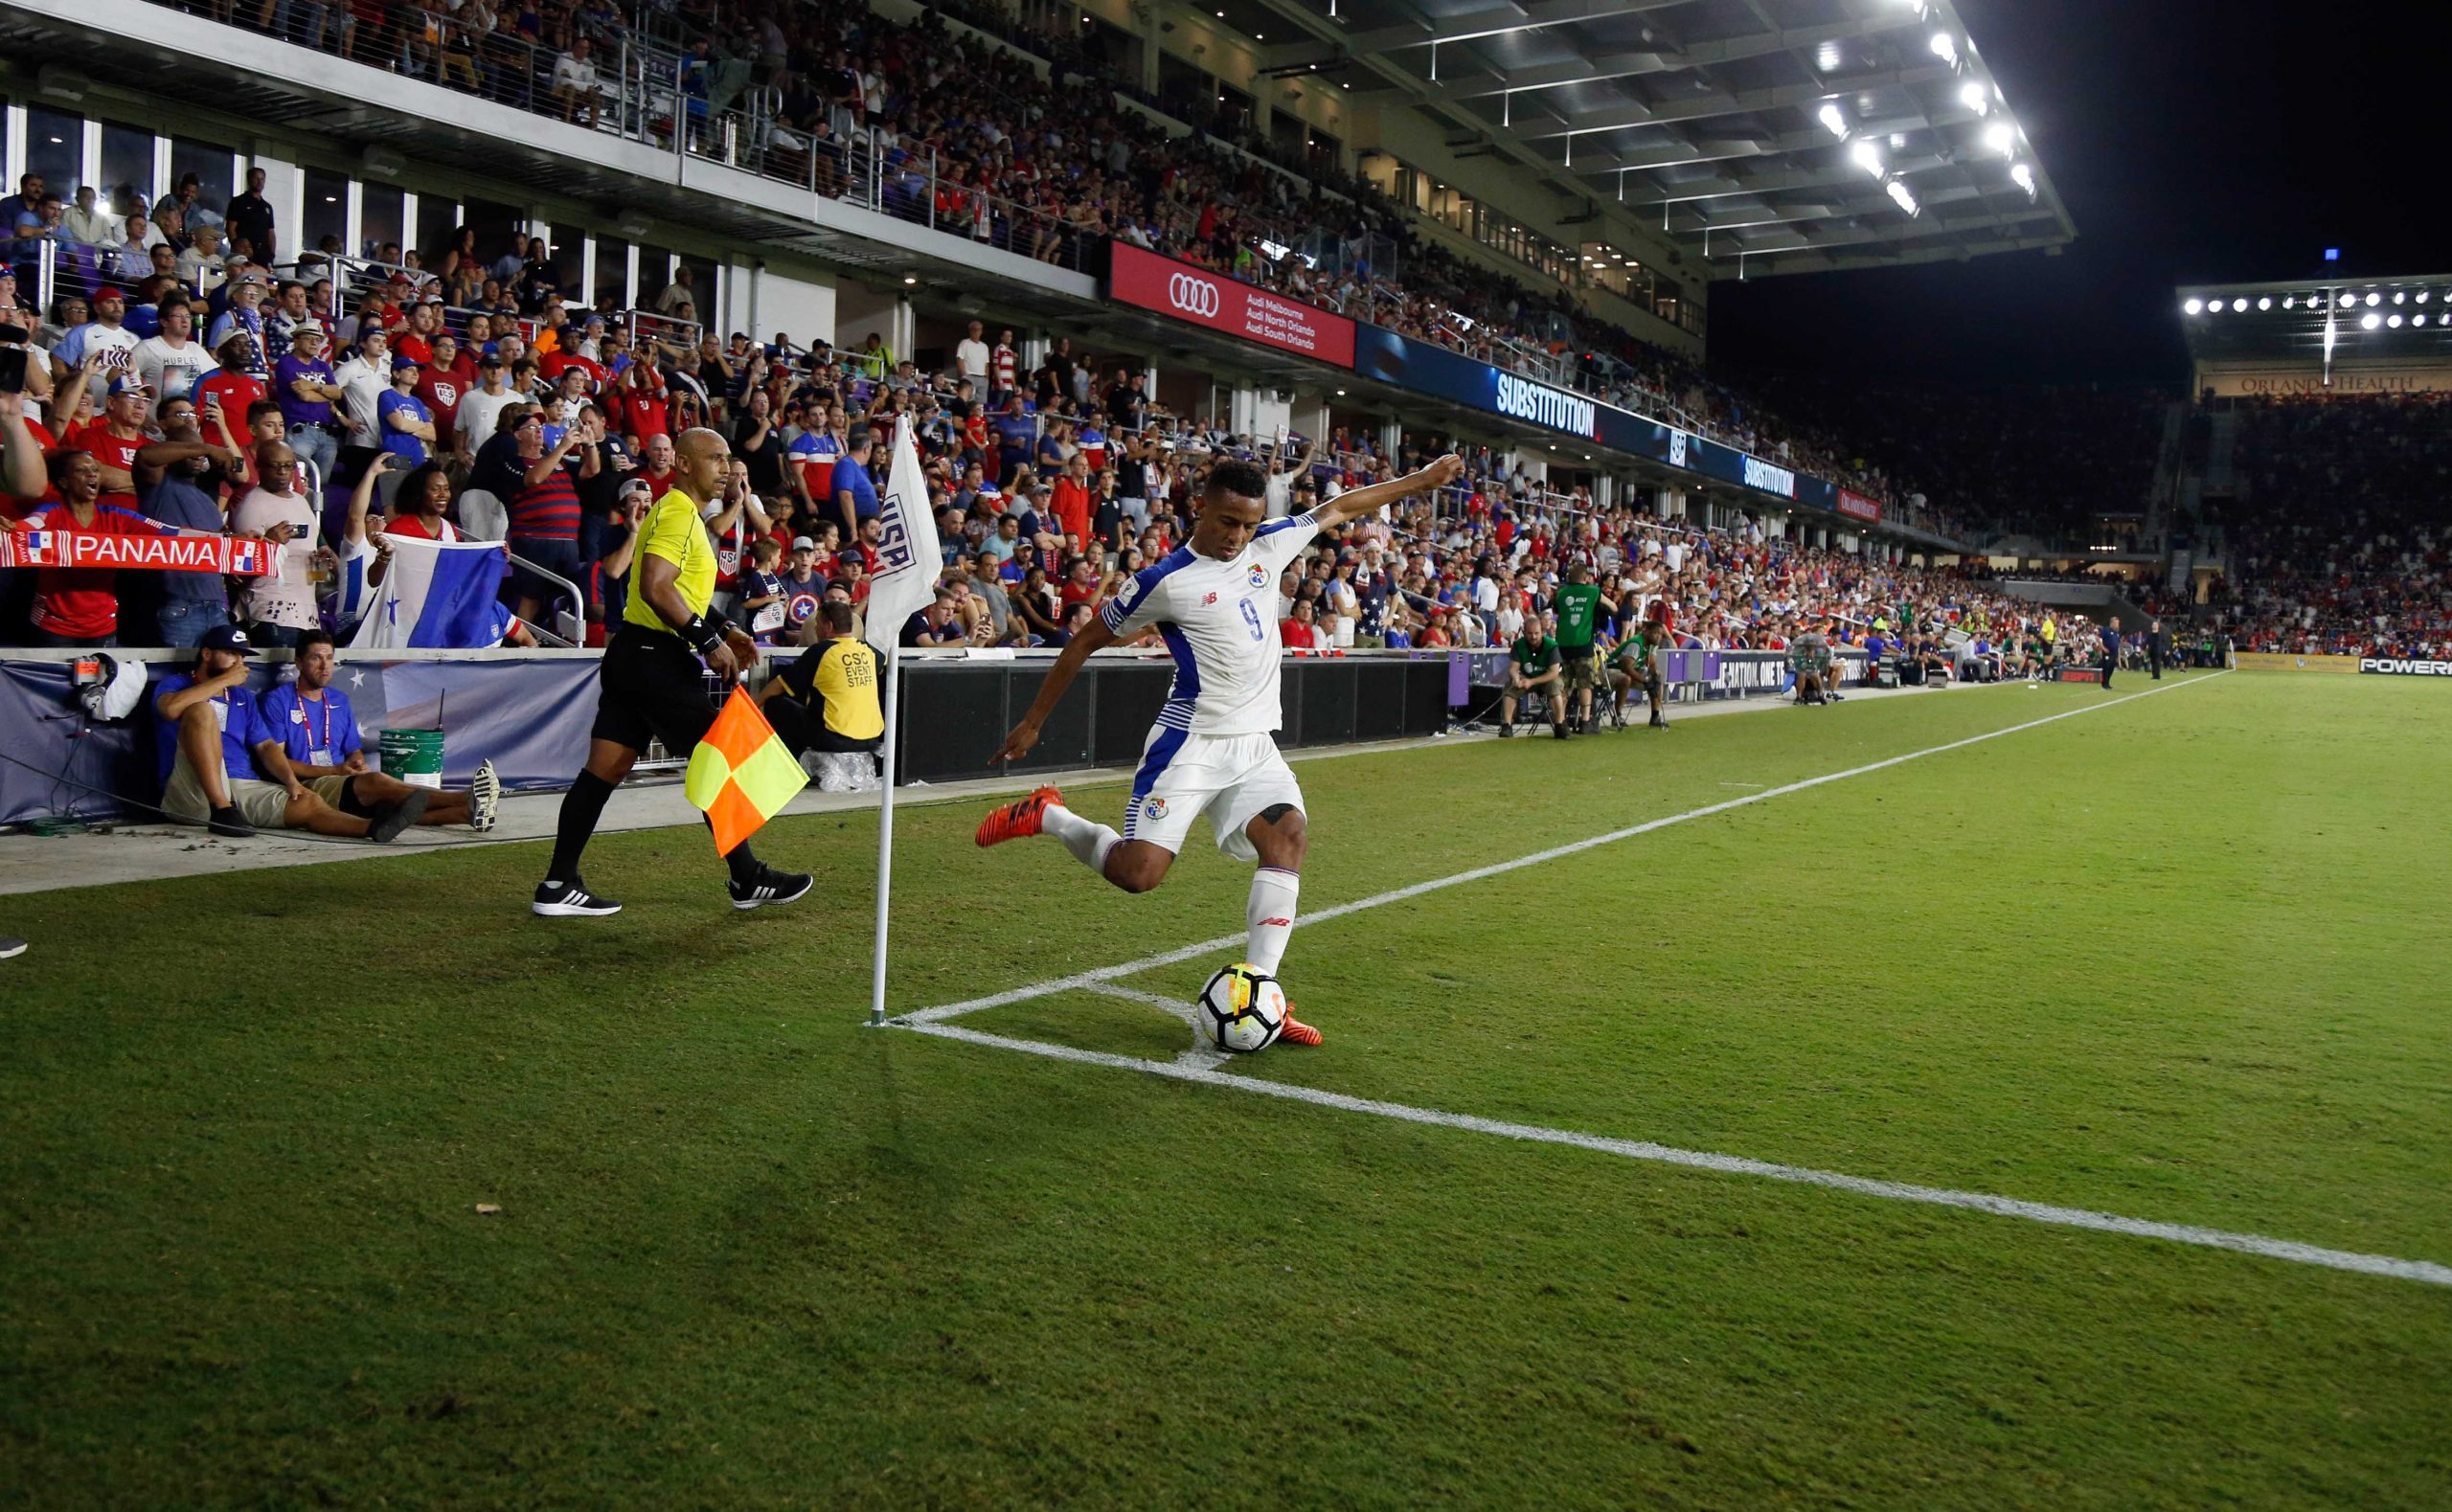 Soccer: 2018 World Cup Qualifier-Panama at USA